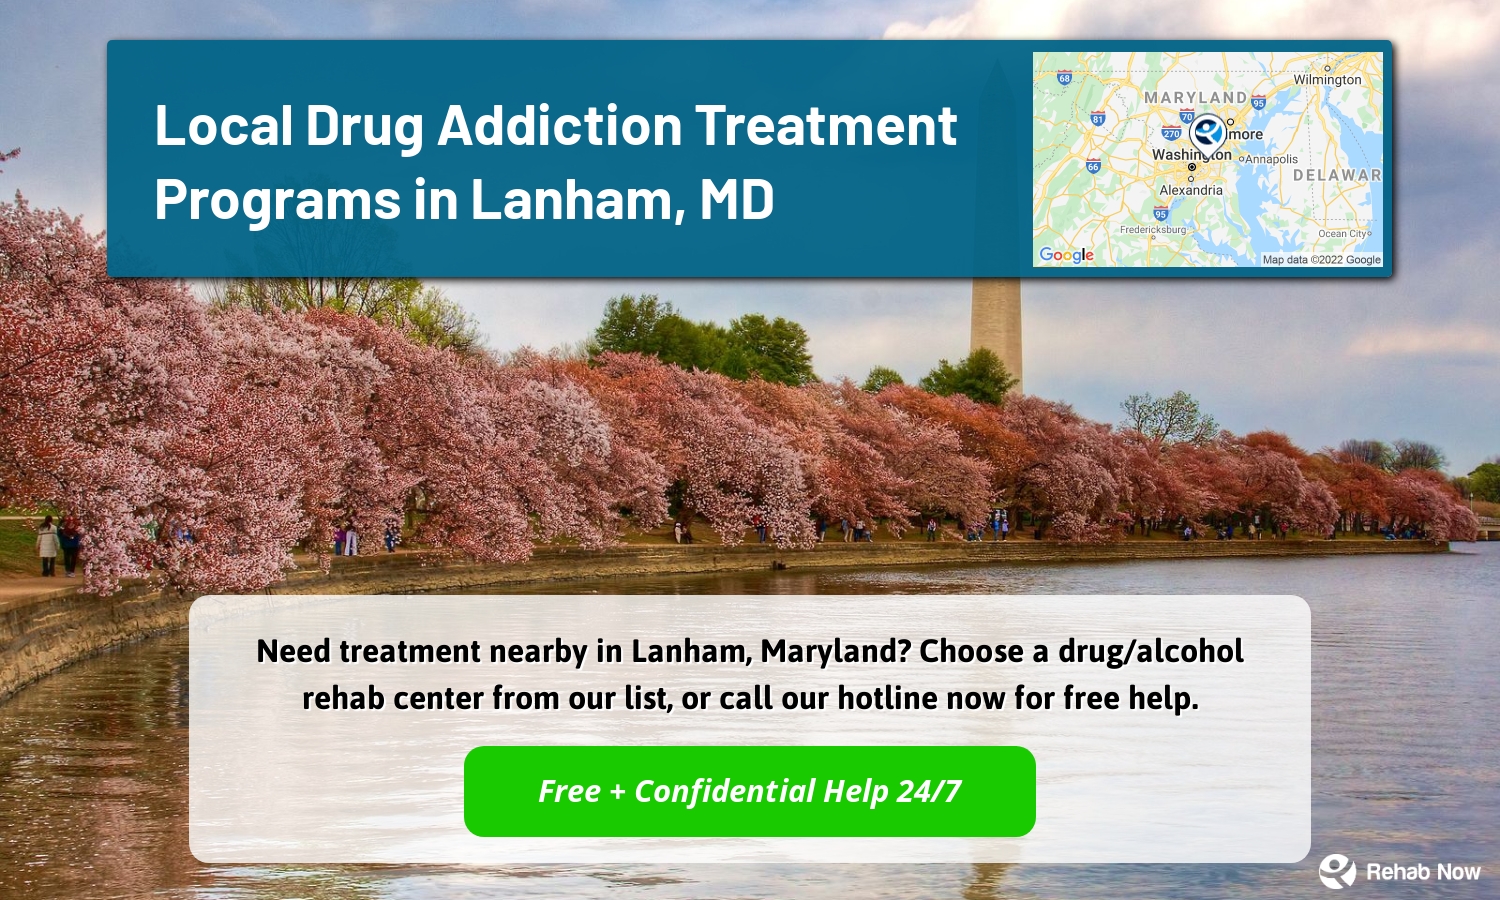 Need treatment nearby in Lanham, Maryland? Choose a drug/alcohol rehab center from our list, or call our hotline now for free help.